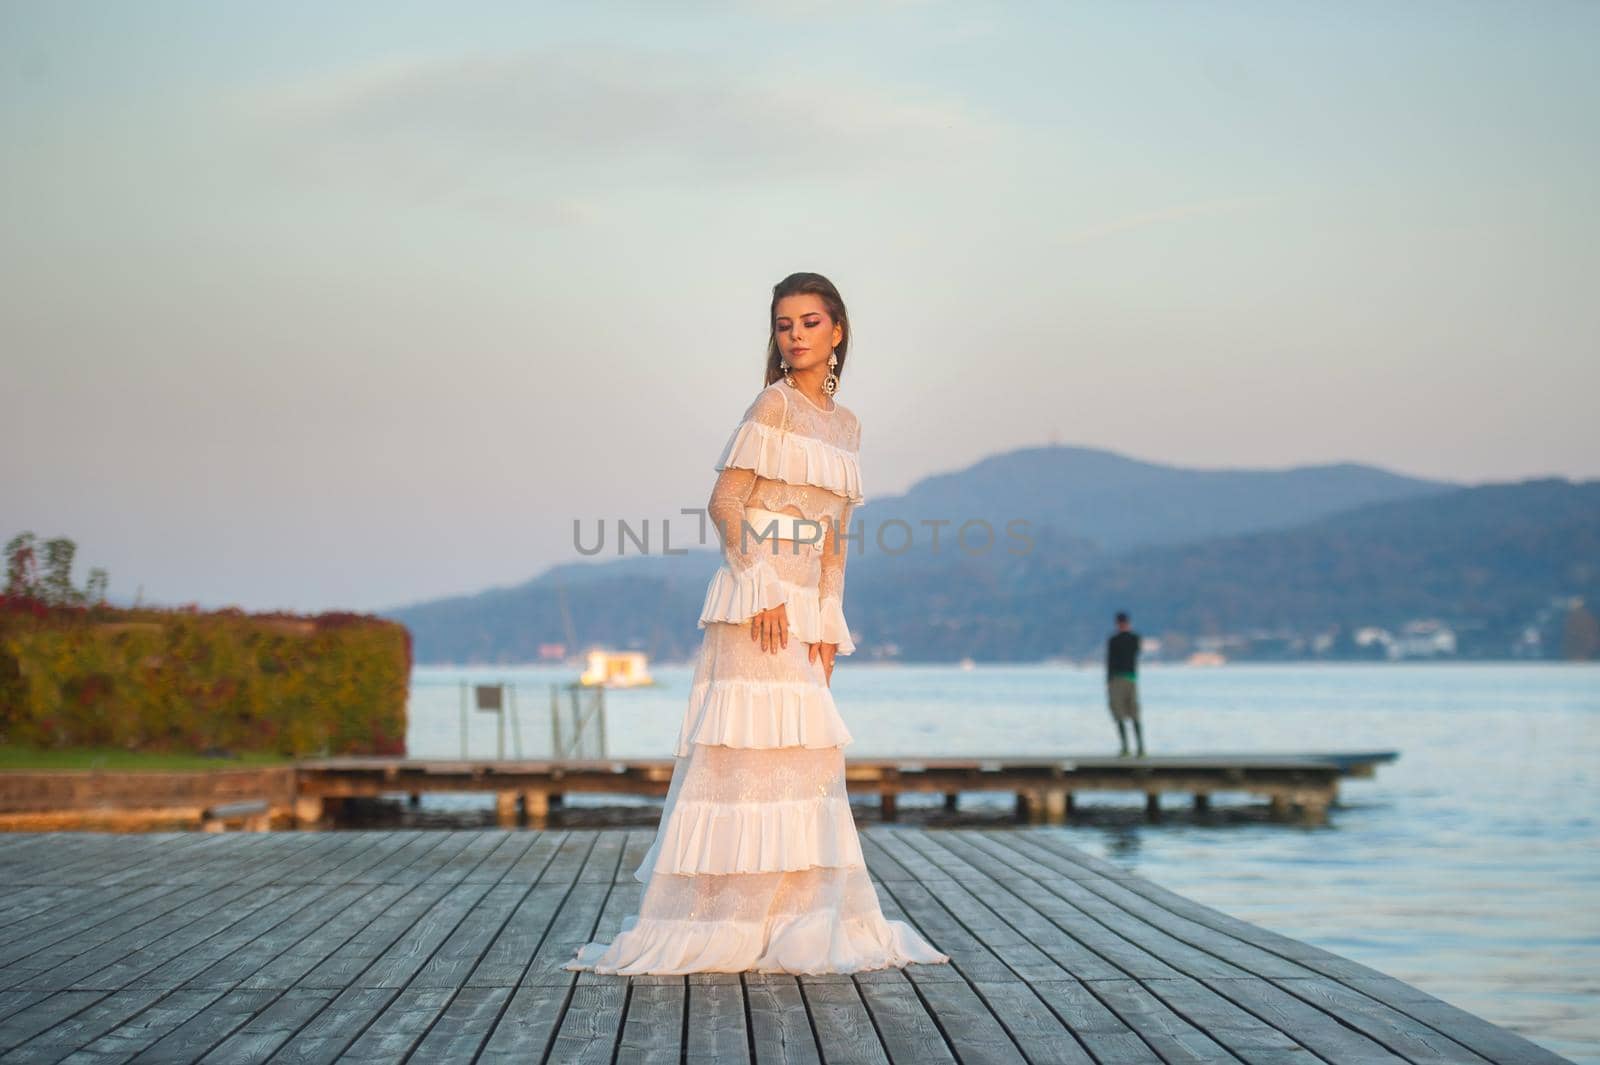 A bride in a white wedding dress in the old town of Austria at sunset.